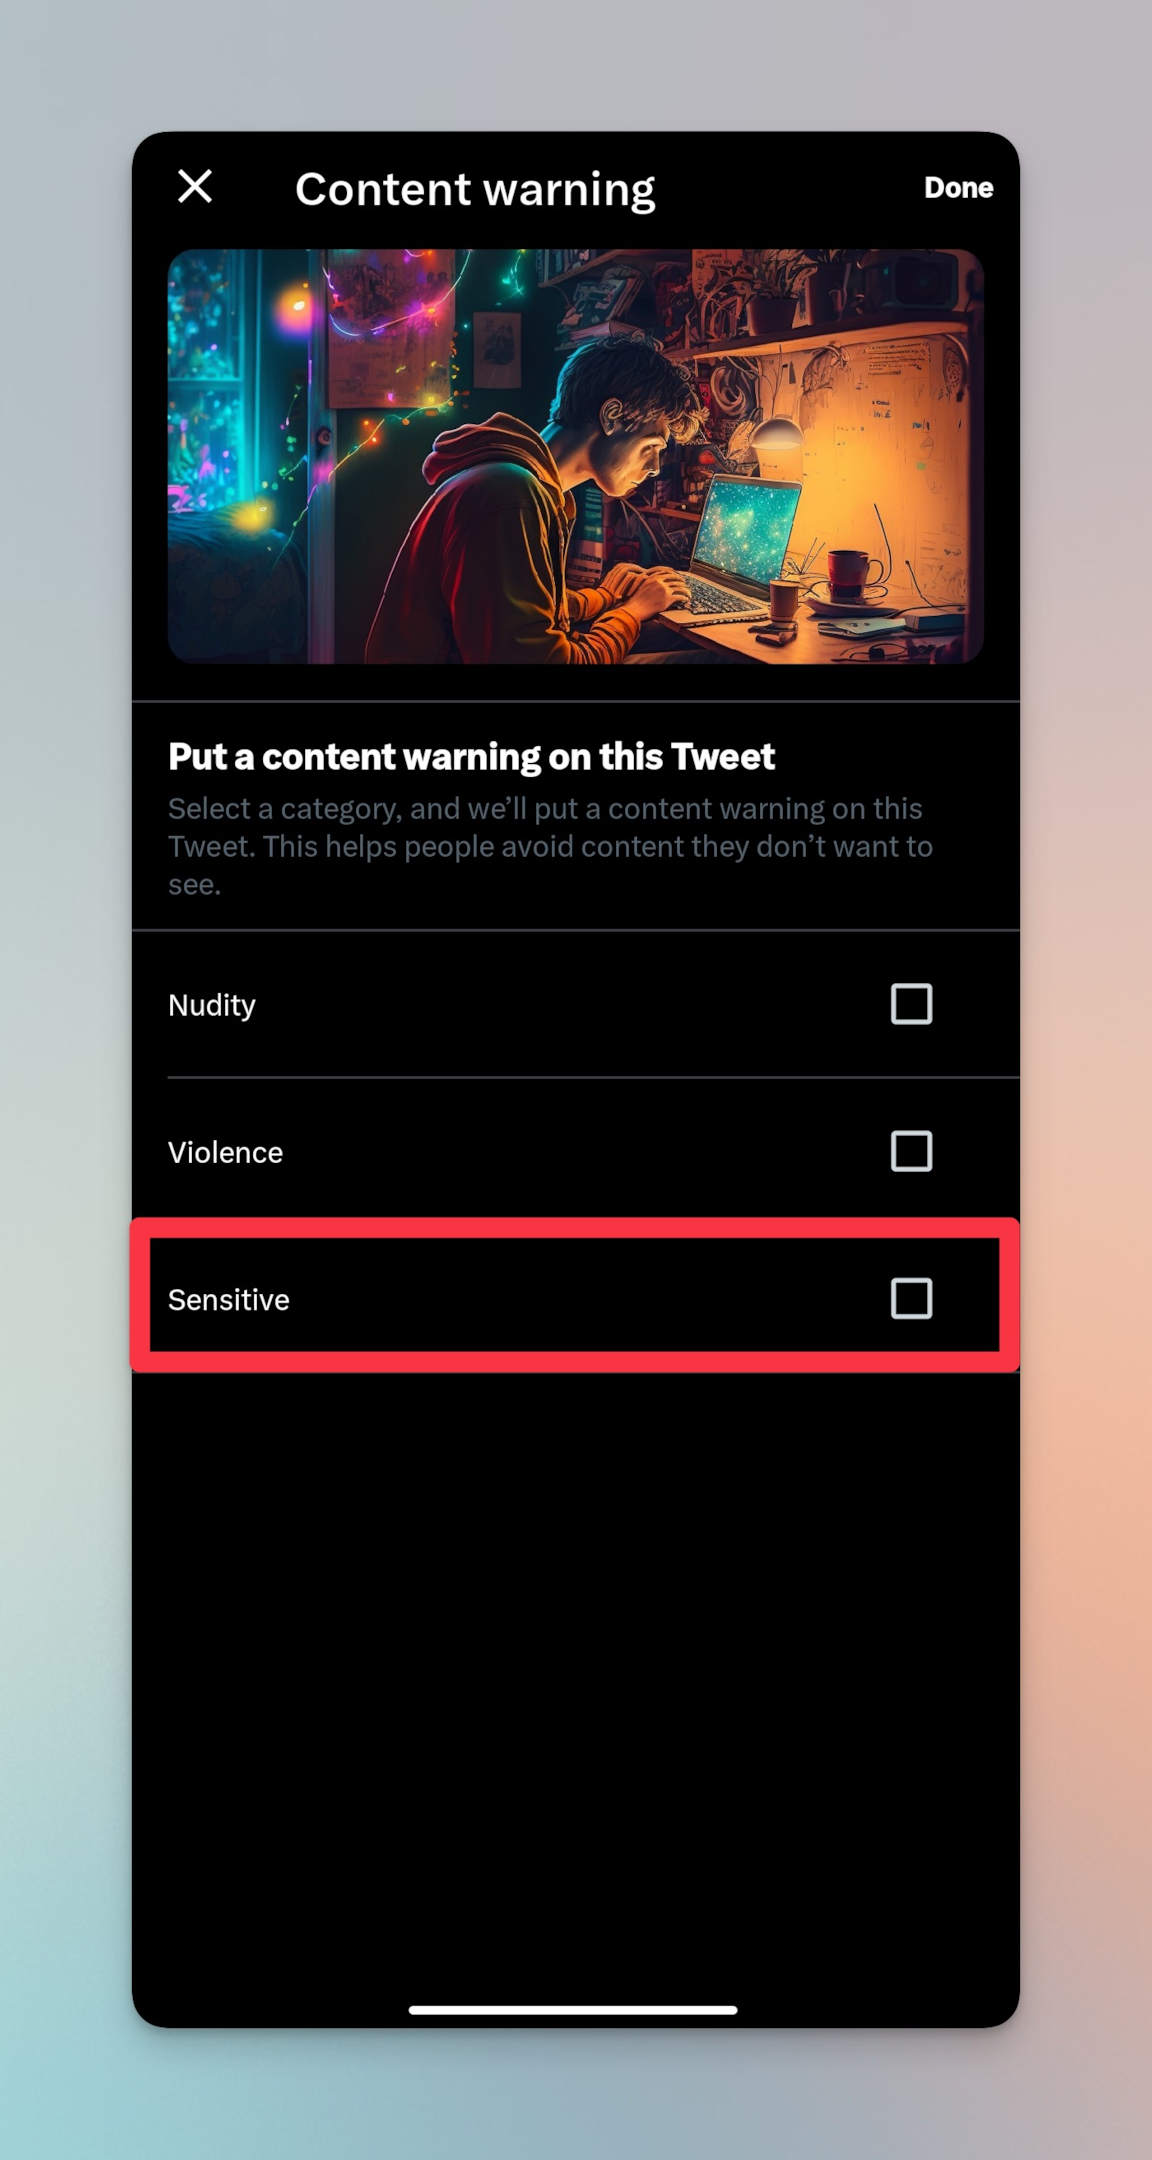 Remote.tools shows to tap on Sensitive checkbox to mark tweets as sensitive.